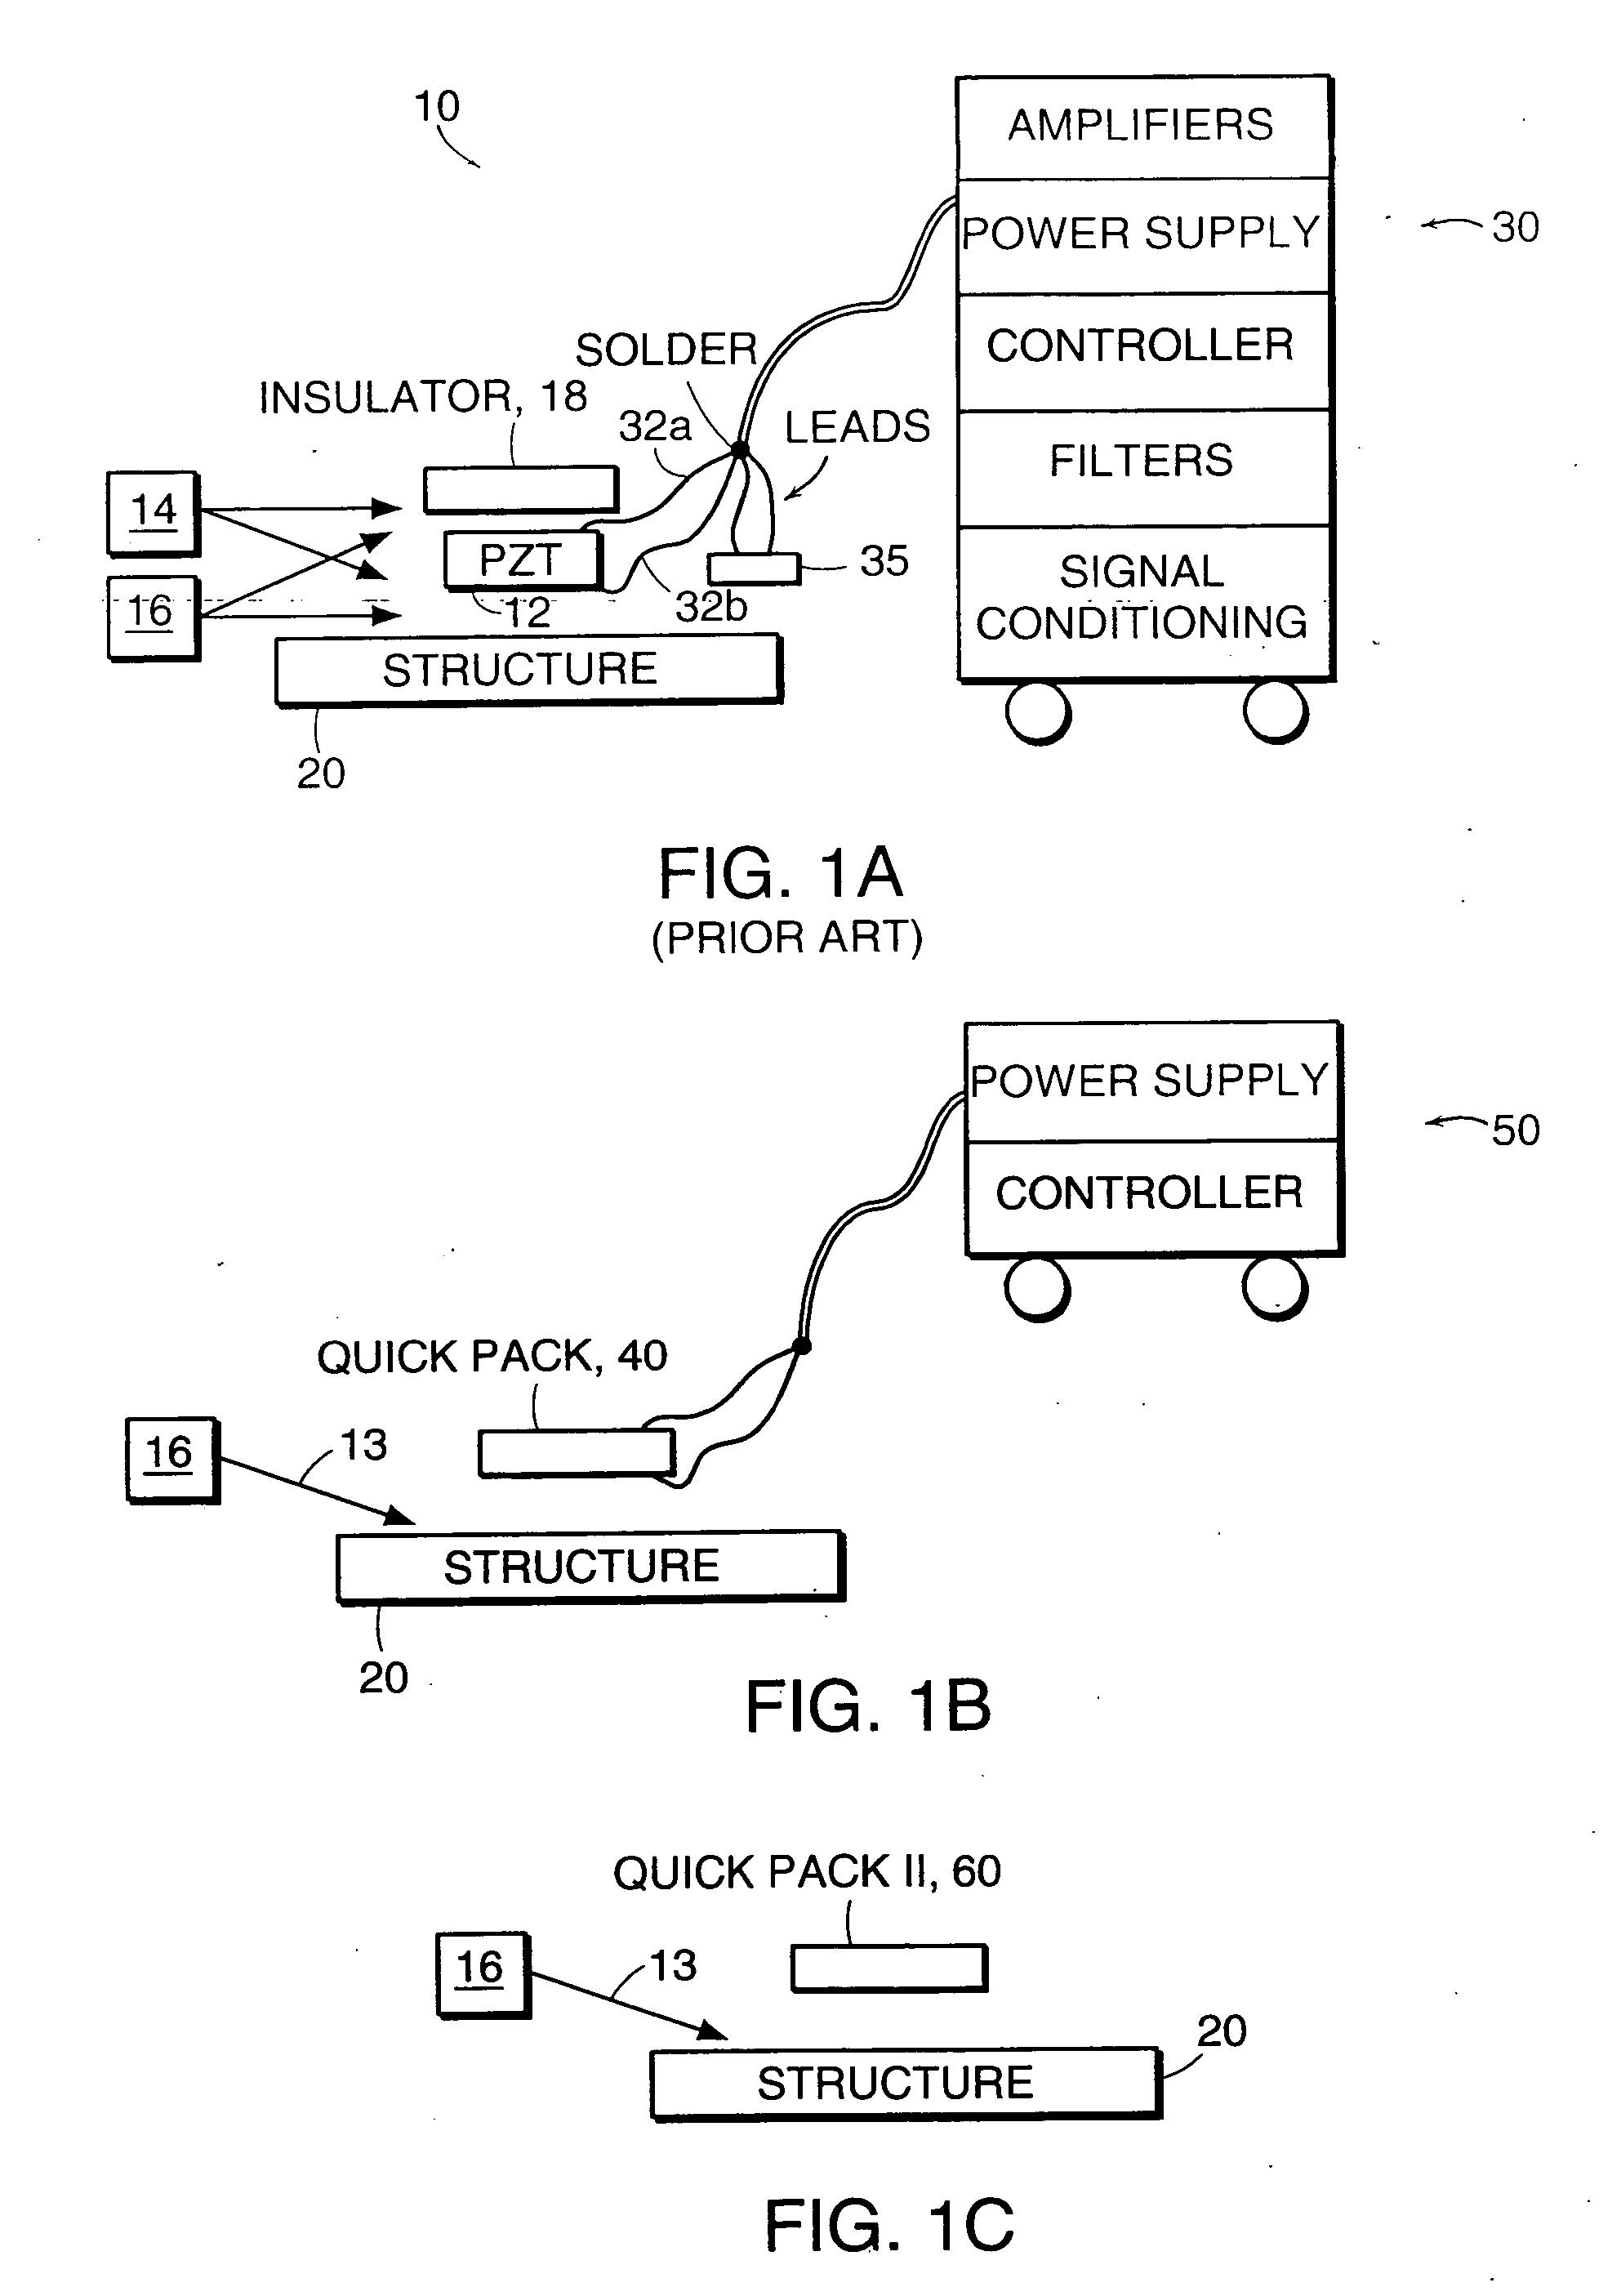 Method and device for vibration control